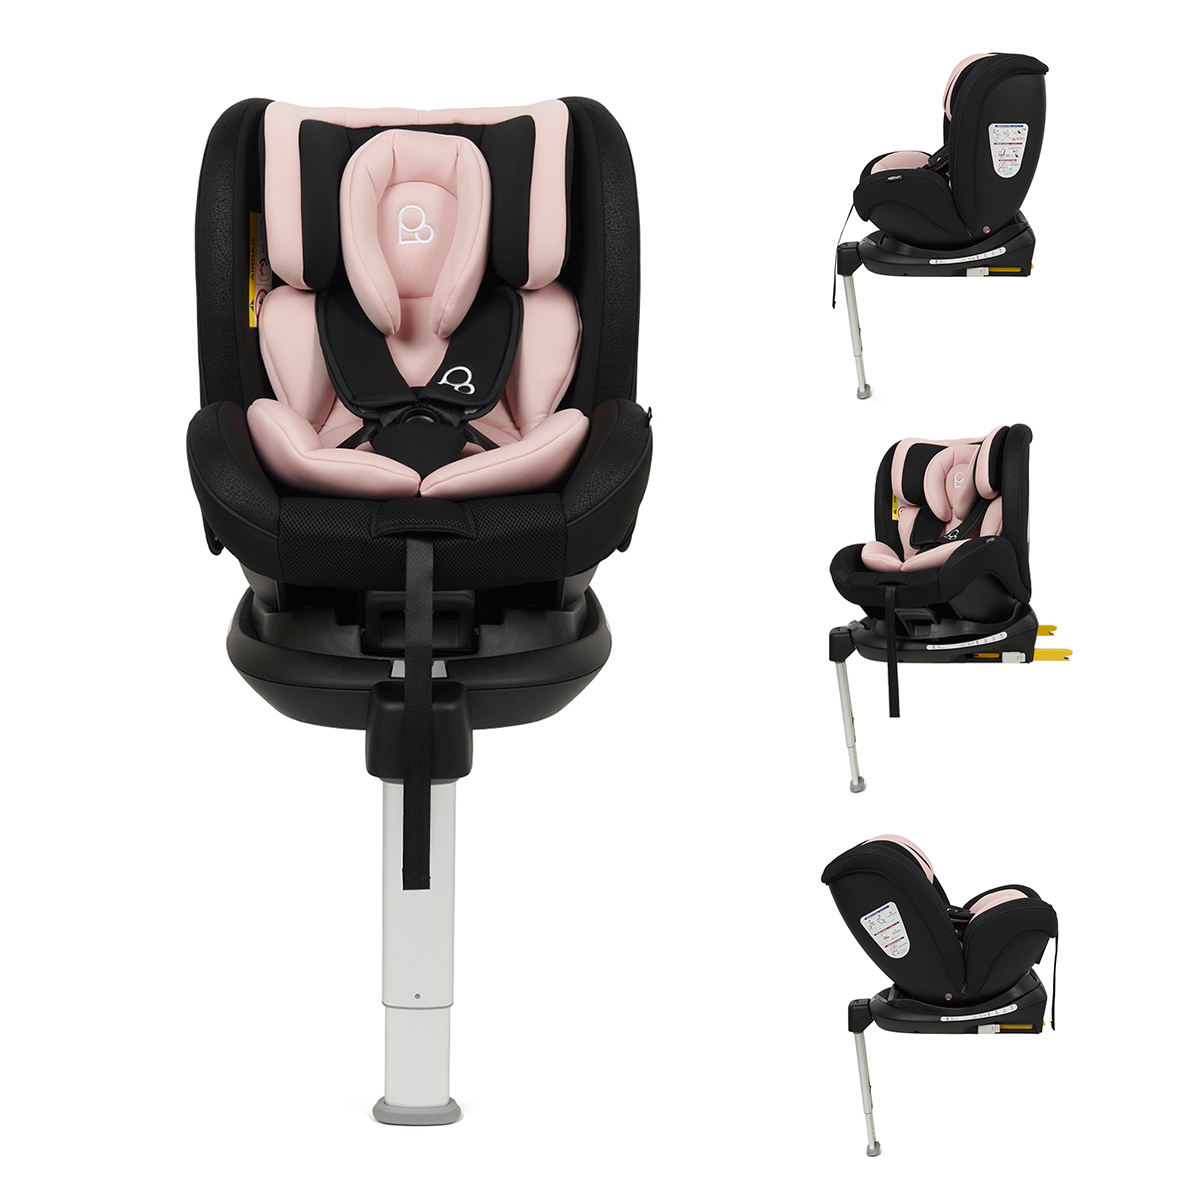 Puggle Safe Fit Luxe 360° Rotate ISOFIX Group 0+123 Car Seat - Blush Pink